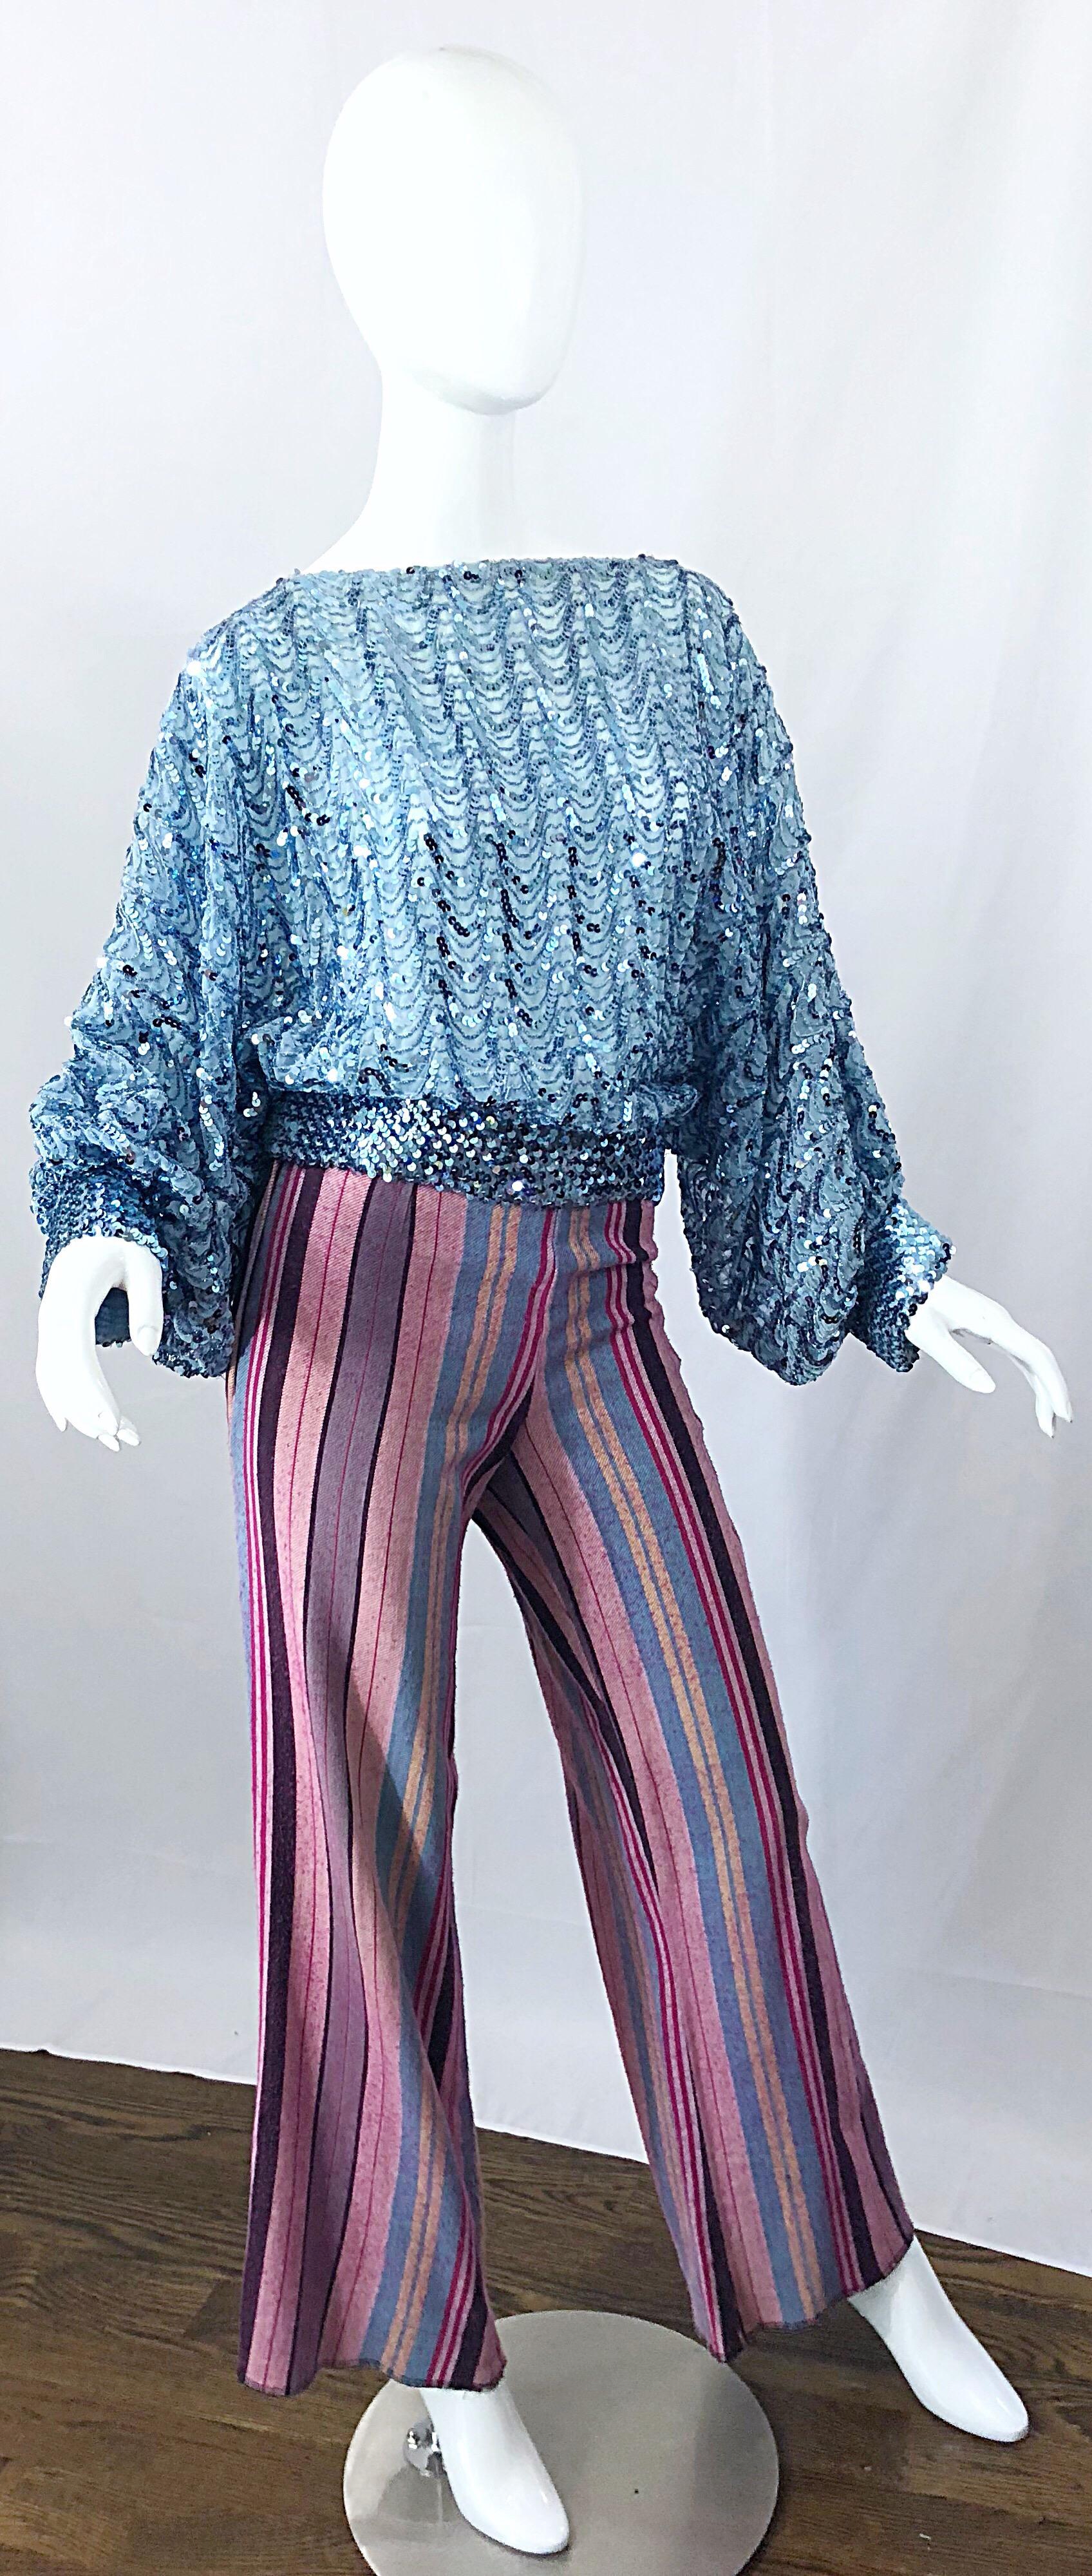 Fabulous 1970s High Waisted Pink + Blue Striped Vintage 70s Bell Bottoms Pants For Sale 4